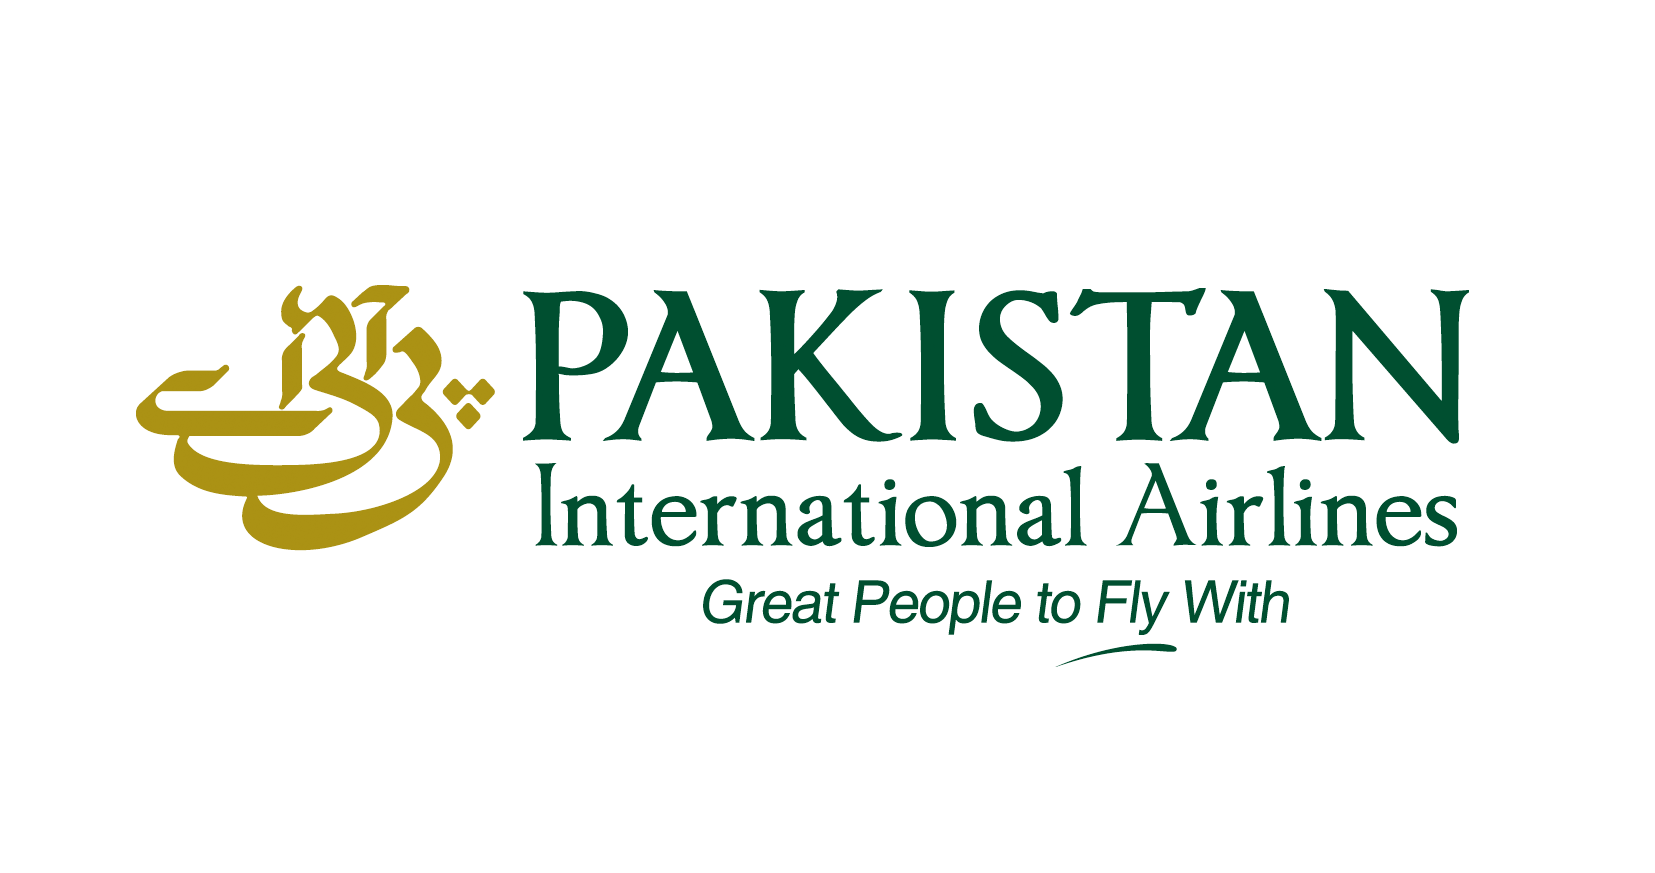 Airline of This European Country Logo - Pakistan International Airlines